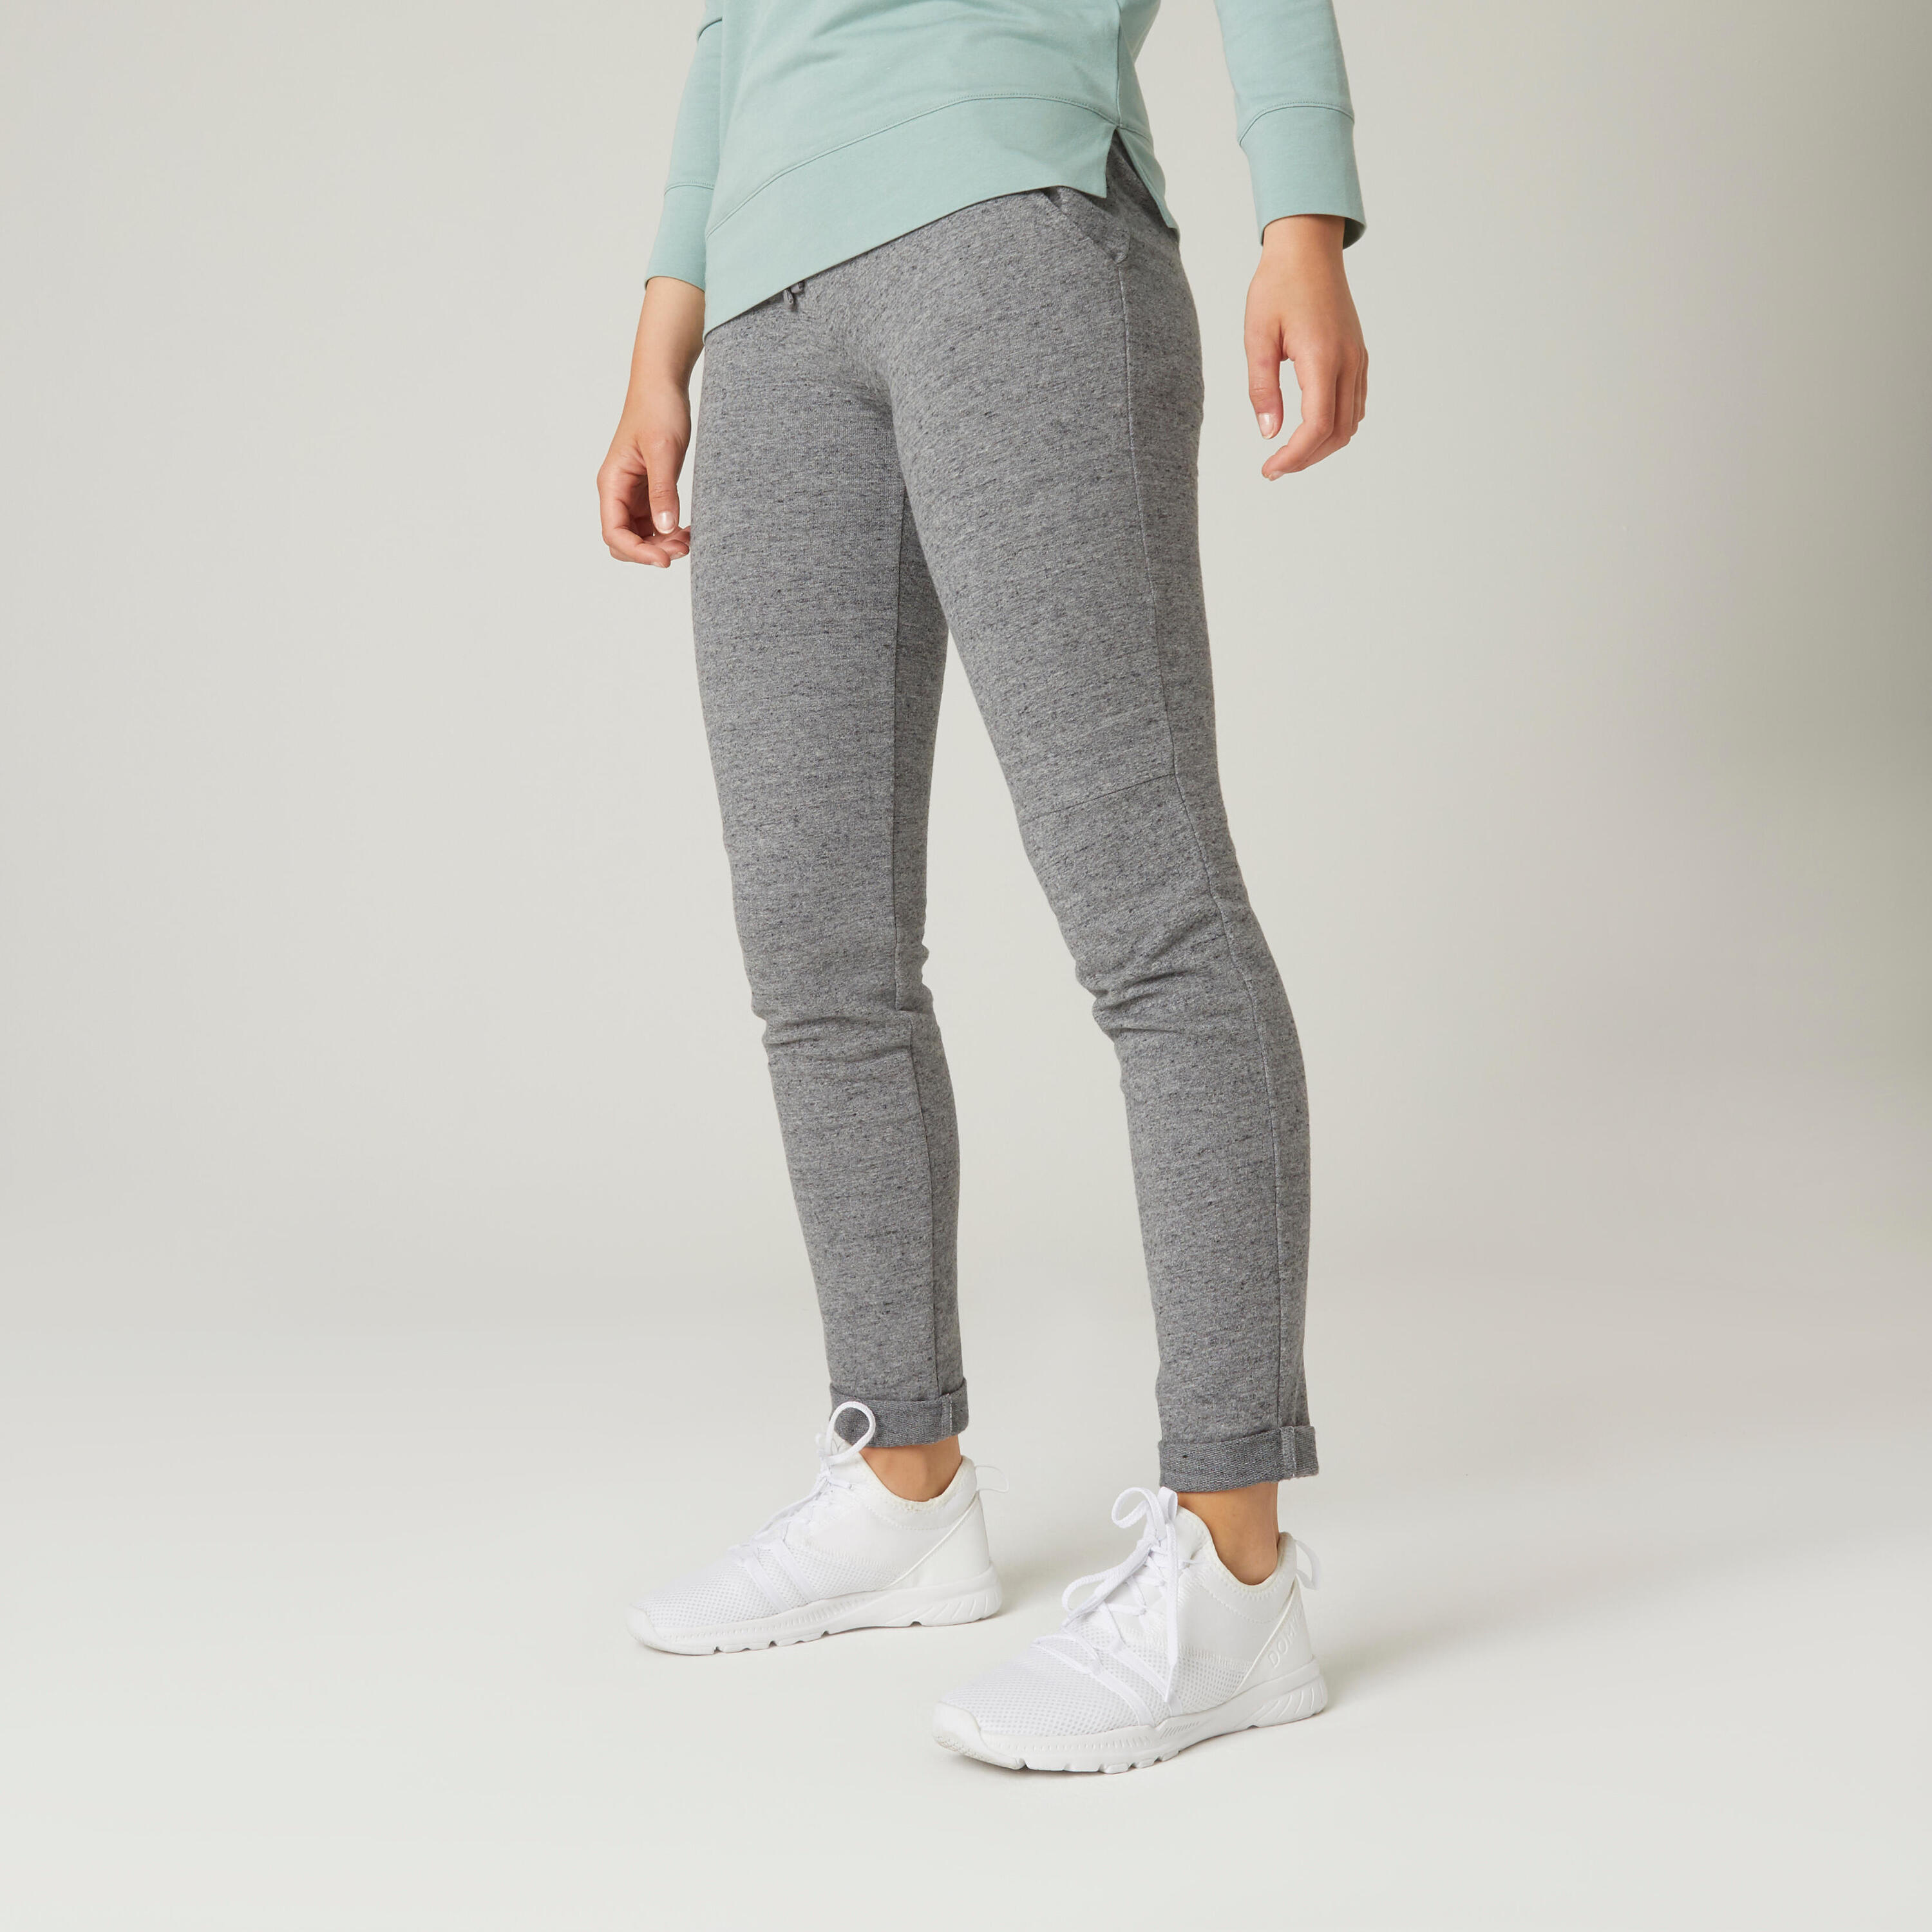 Lululemon Heathered Grey Legging with Blue Waist Panel and Front Zippe –  The Saved Collection